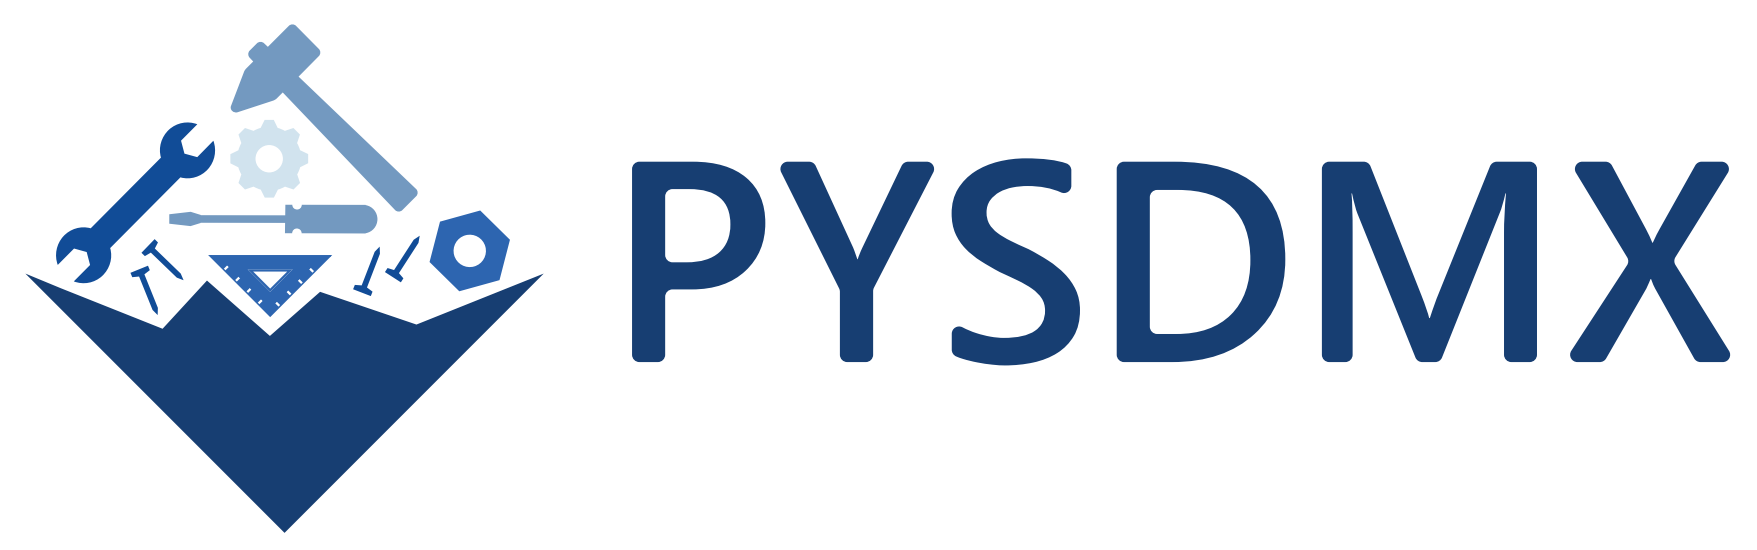 New tool launched - pysdmx